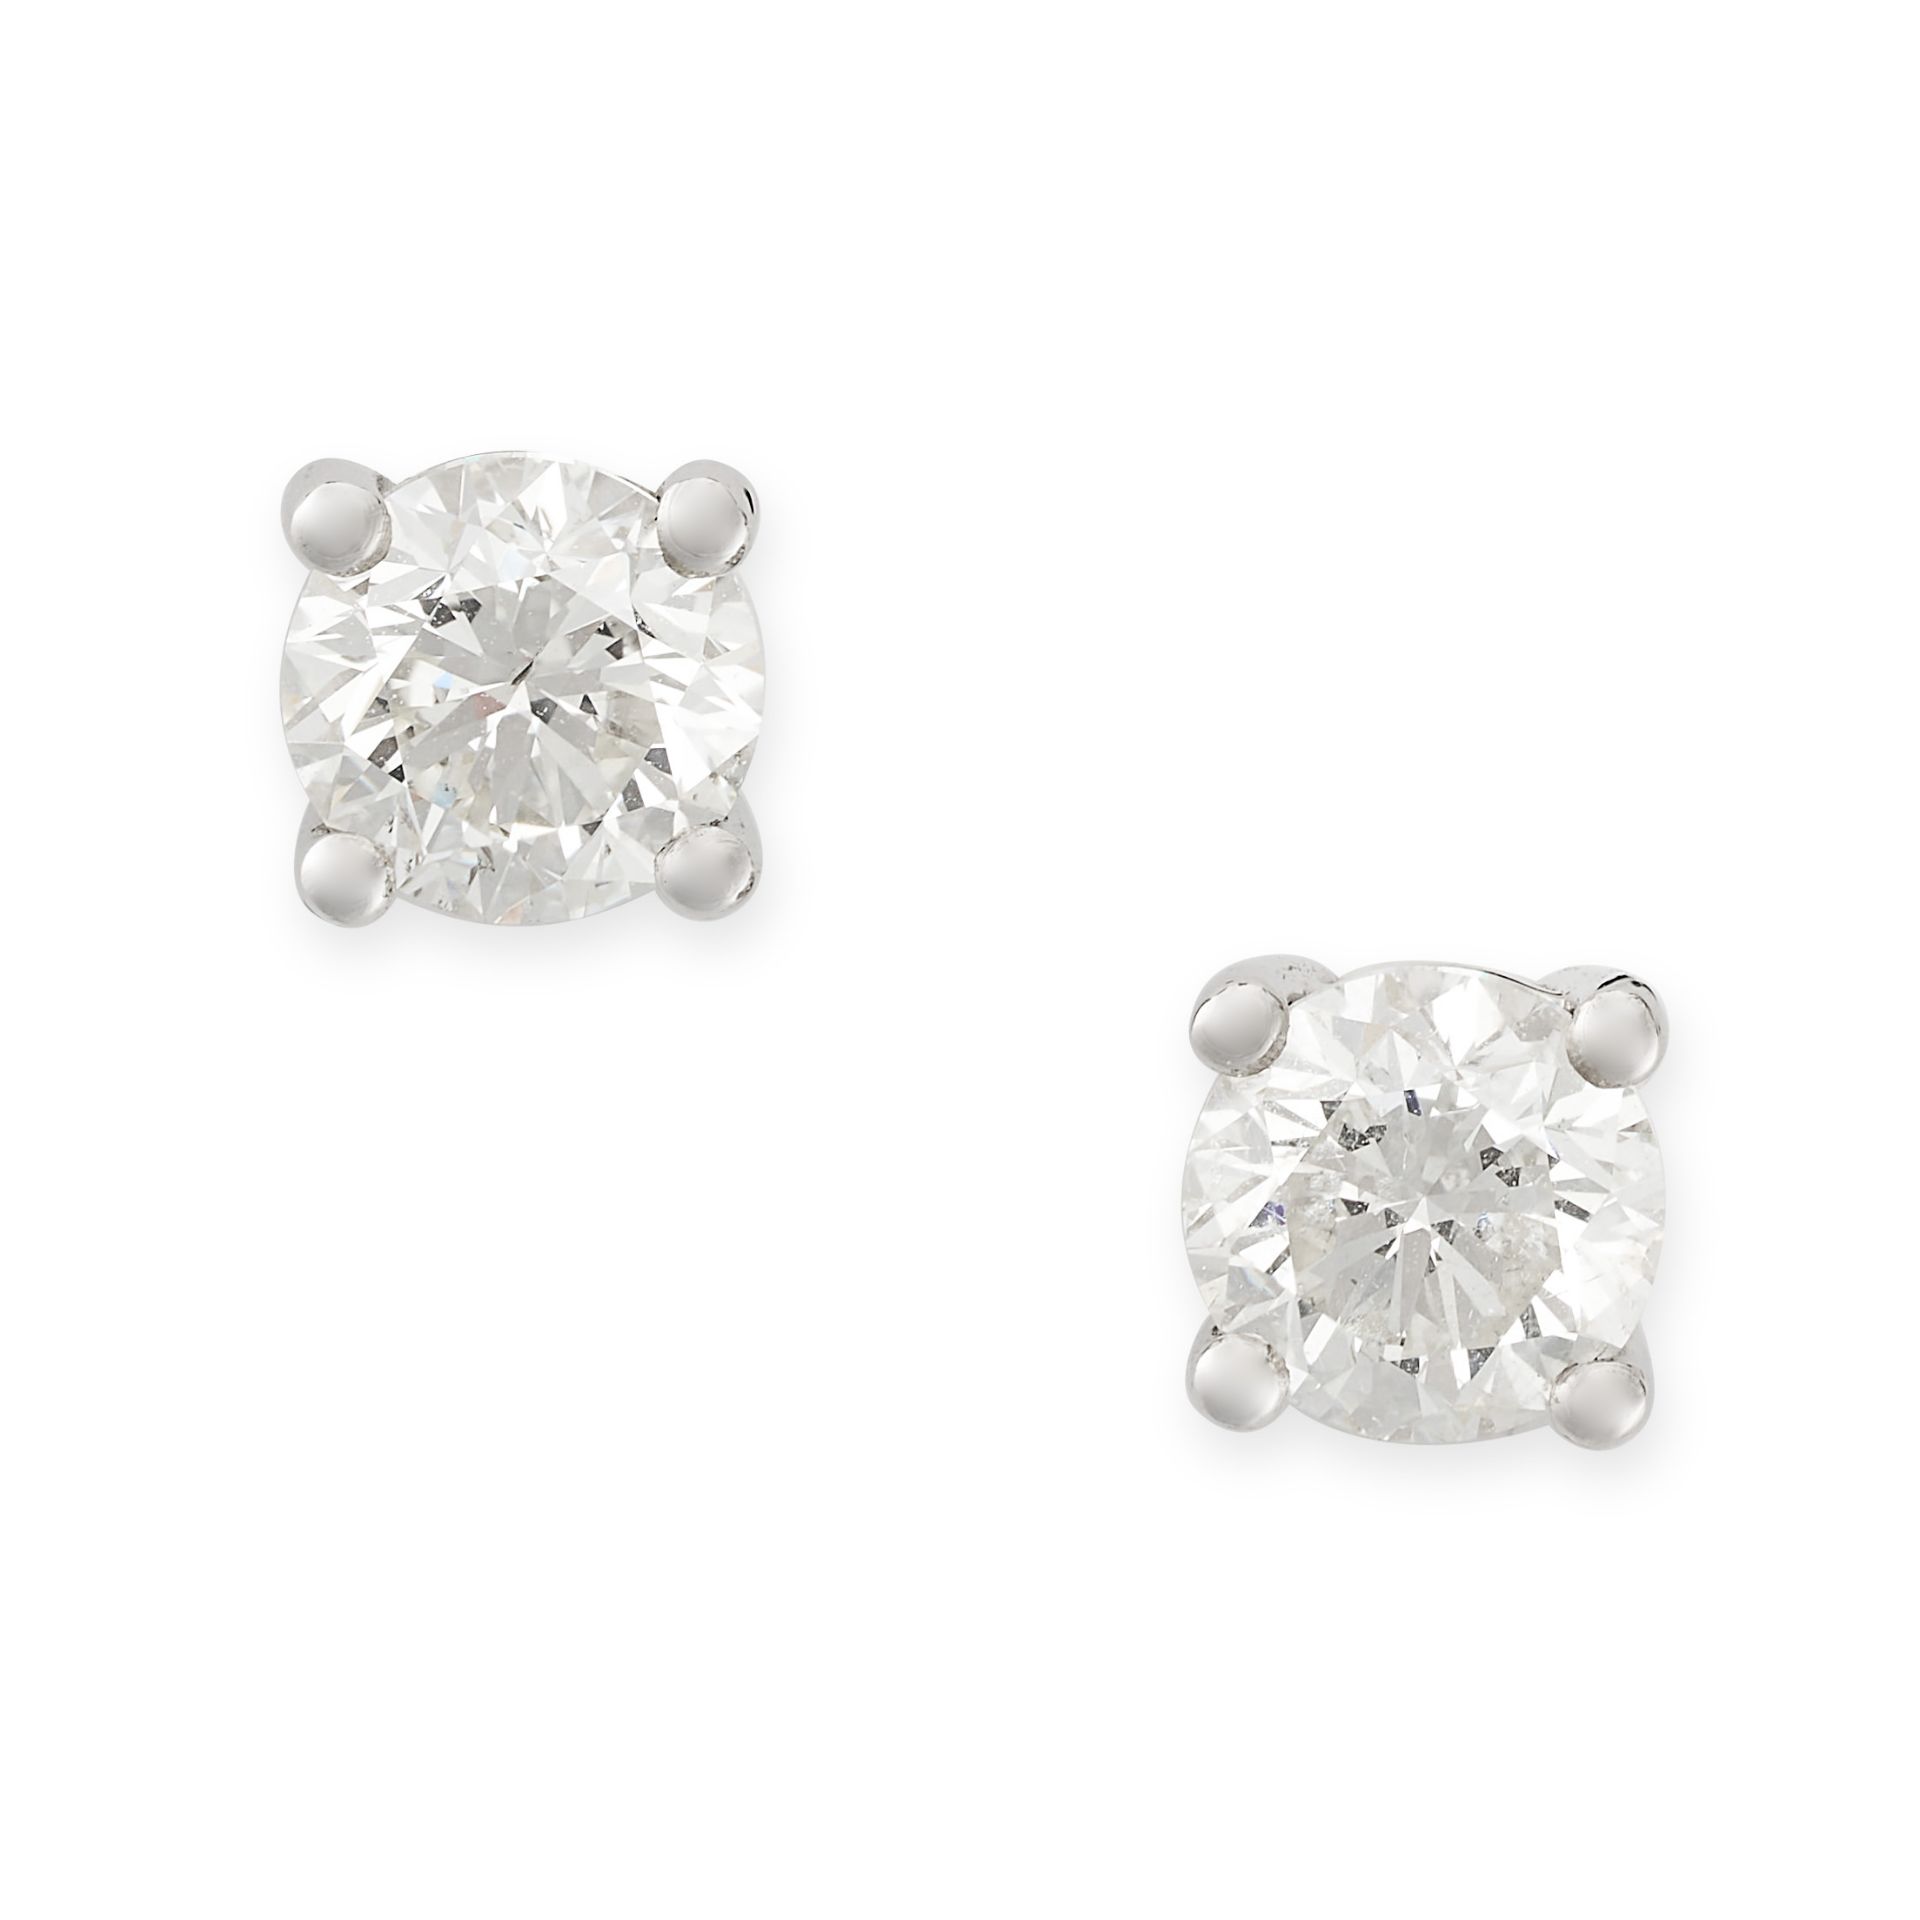 A PAIR OF DIAMOND STUD EARRINGS in 18ct white gold, each set with a round brilliant cut diamond both